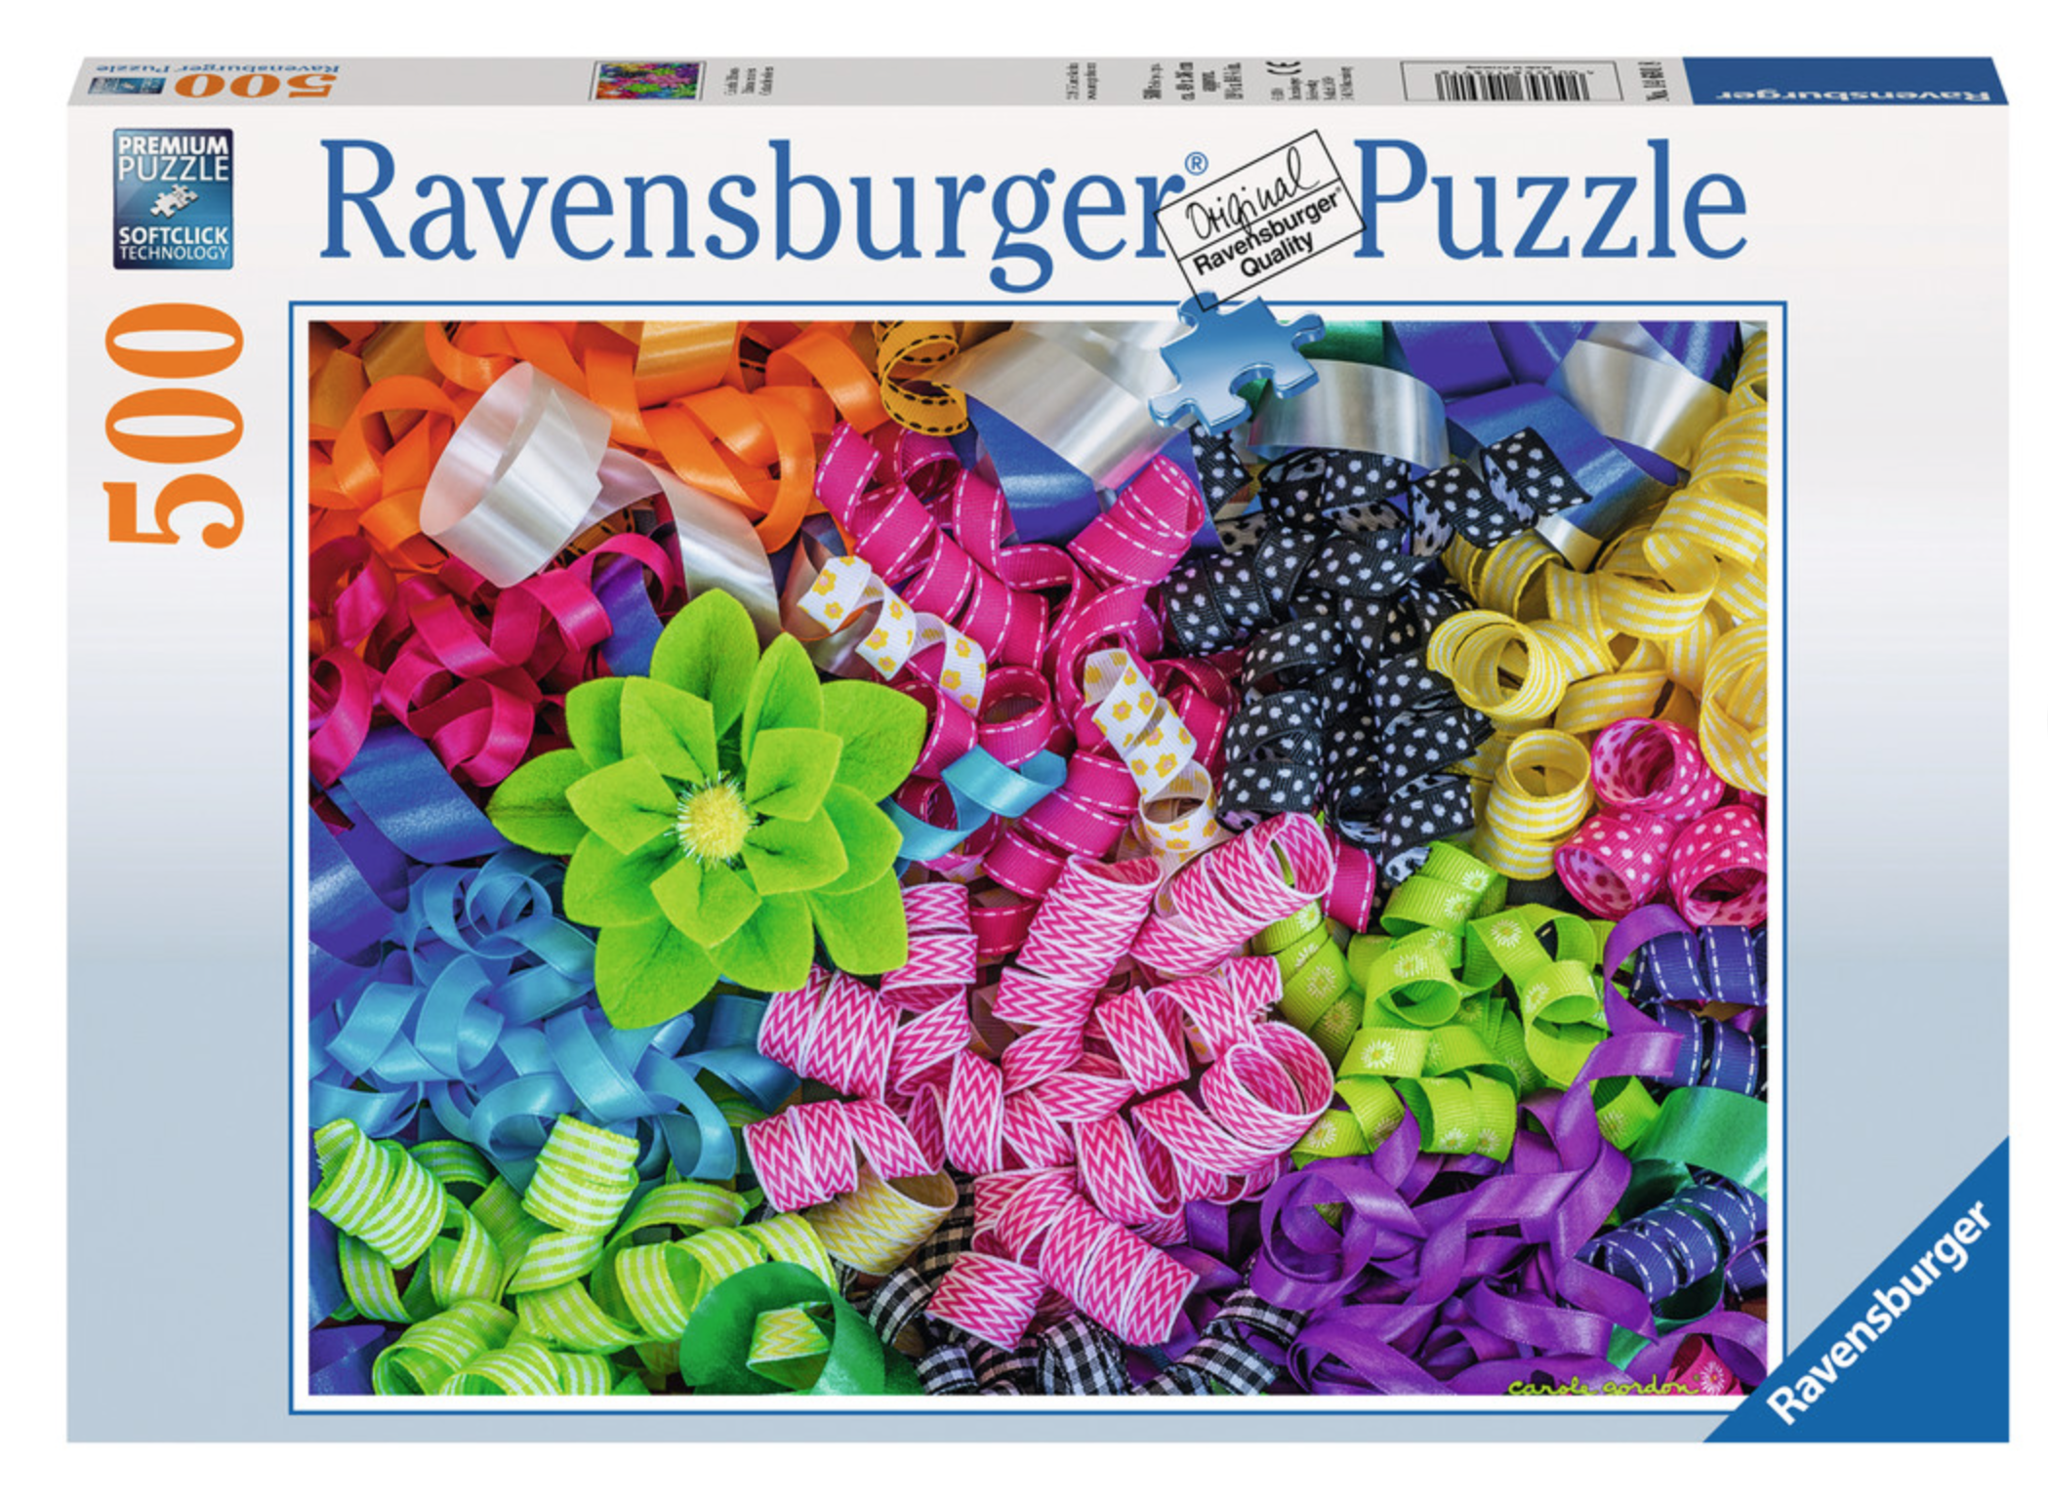 Ravensburger Adult Puzzles 500 pc Puzzles - Colorful Ribbons 14691